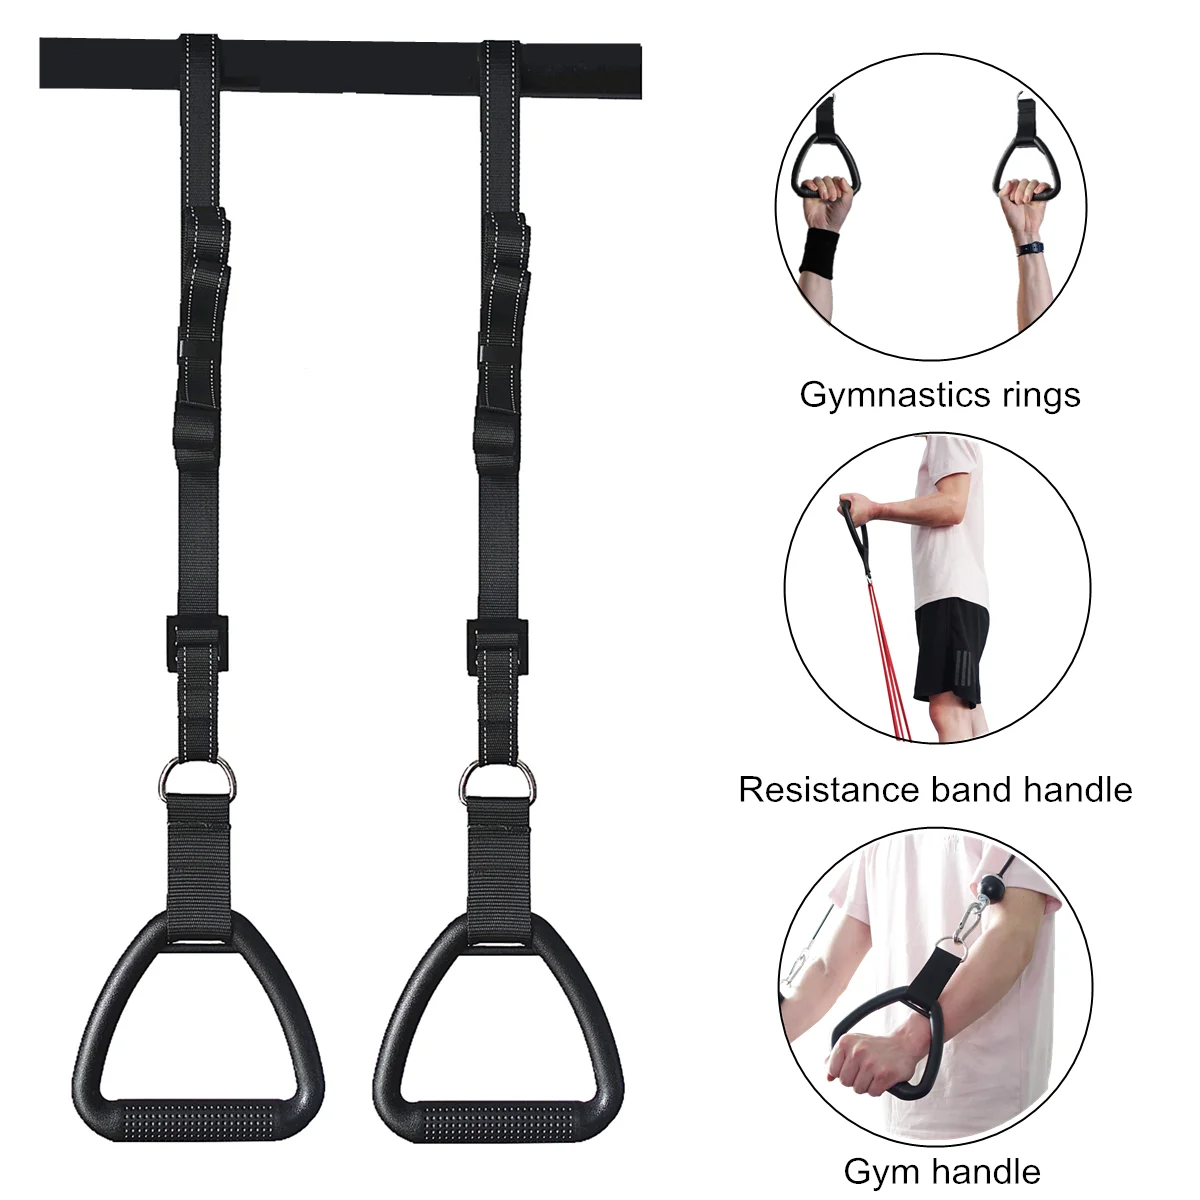 Multifunction Gymnastic Rings Resistance Band Cable Machine Gym Handles for Core Workout Crossfit Abdominal Muscle Building